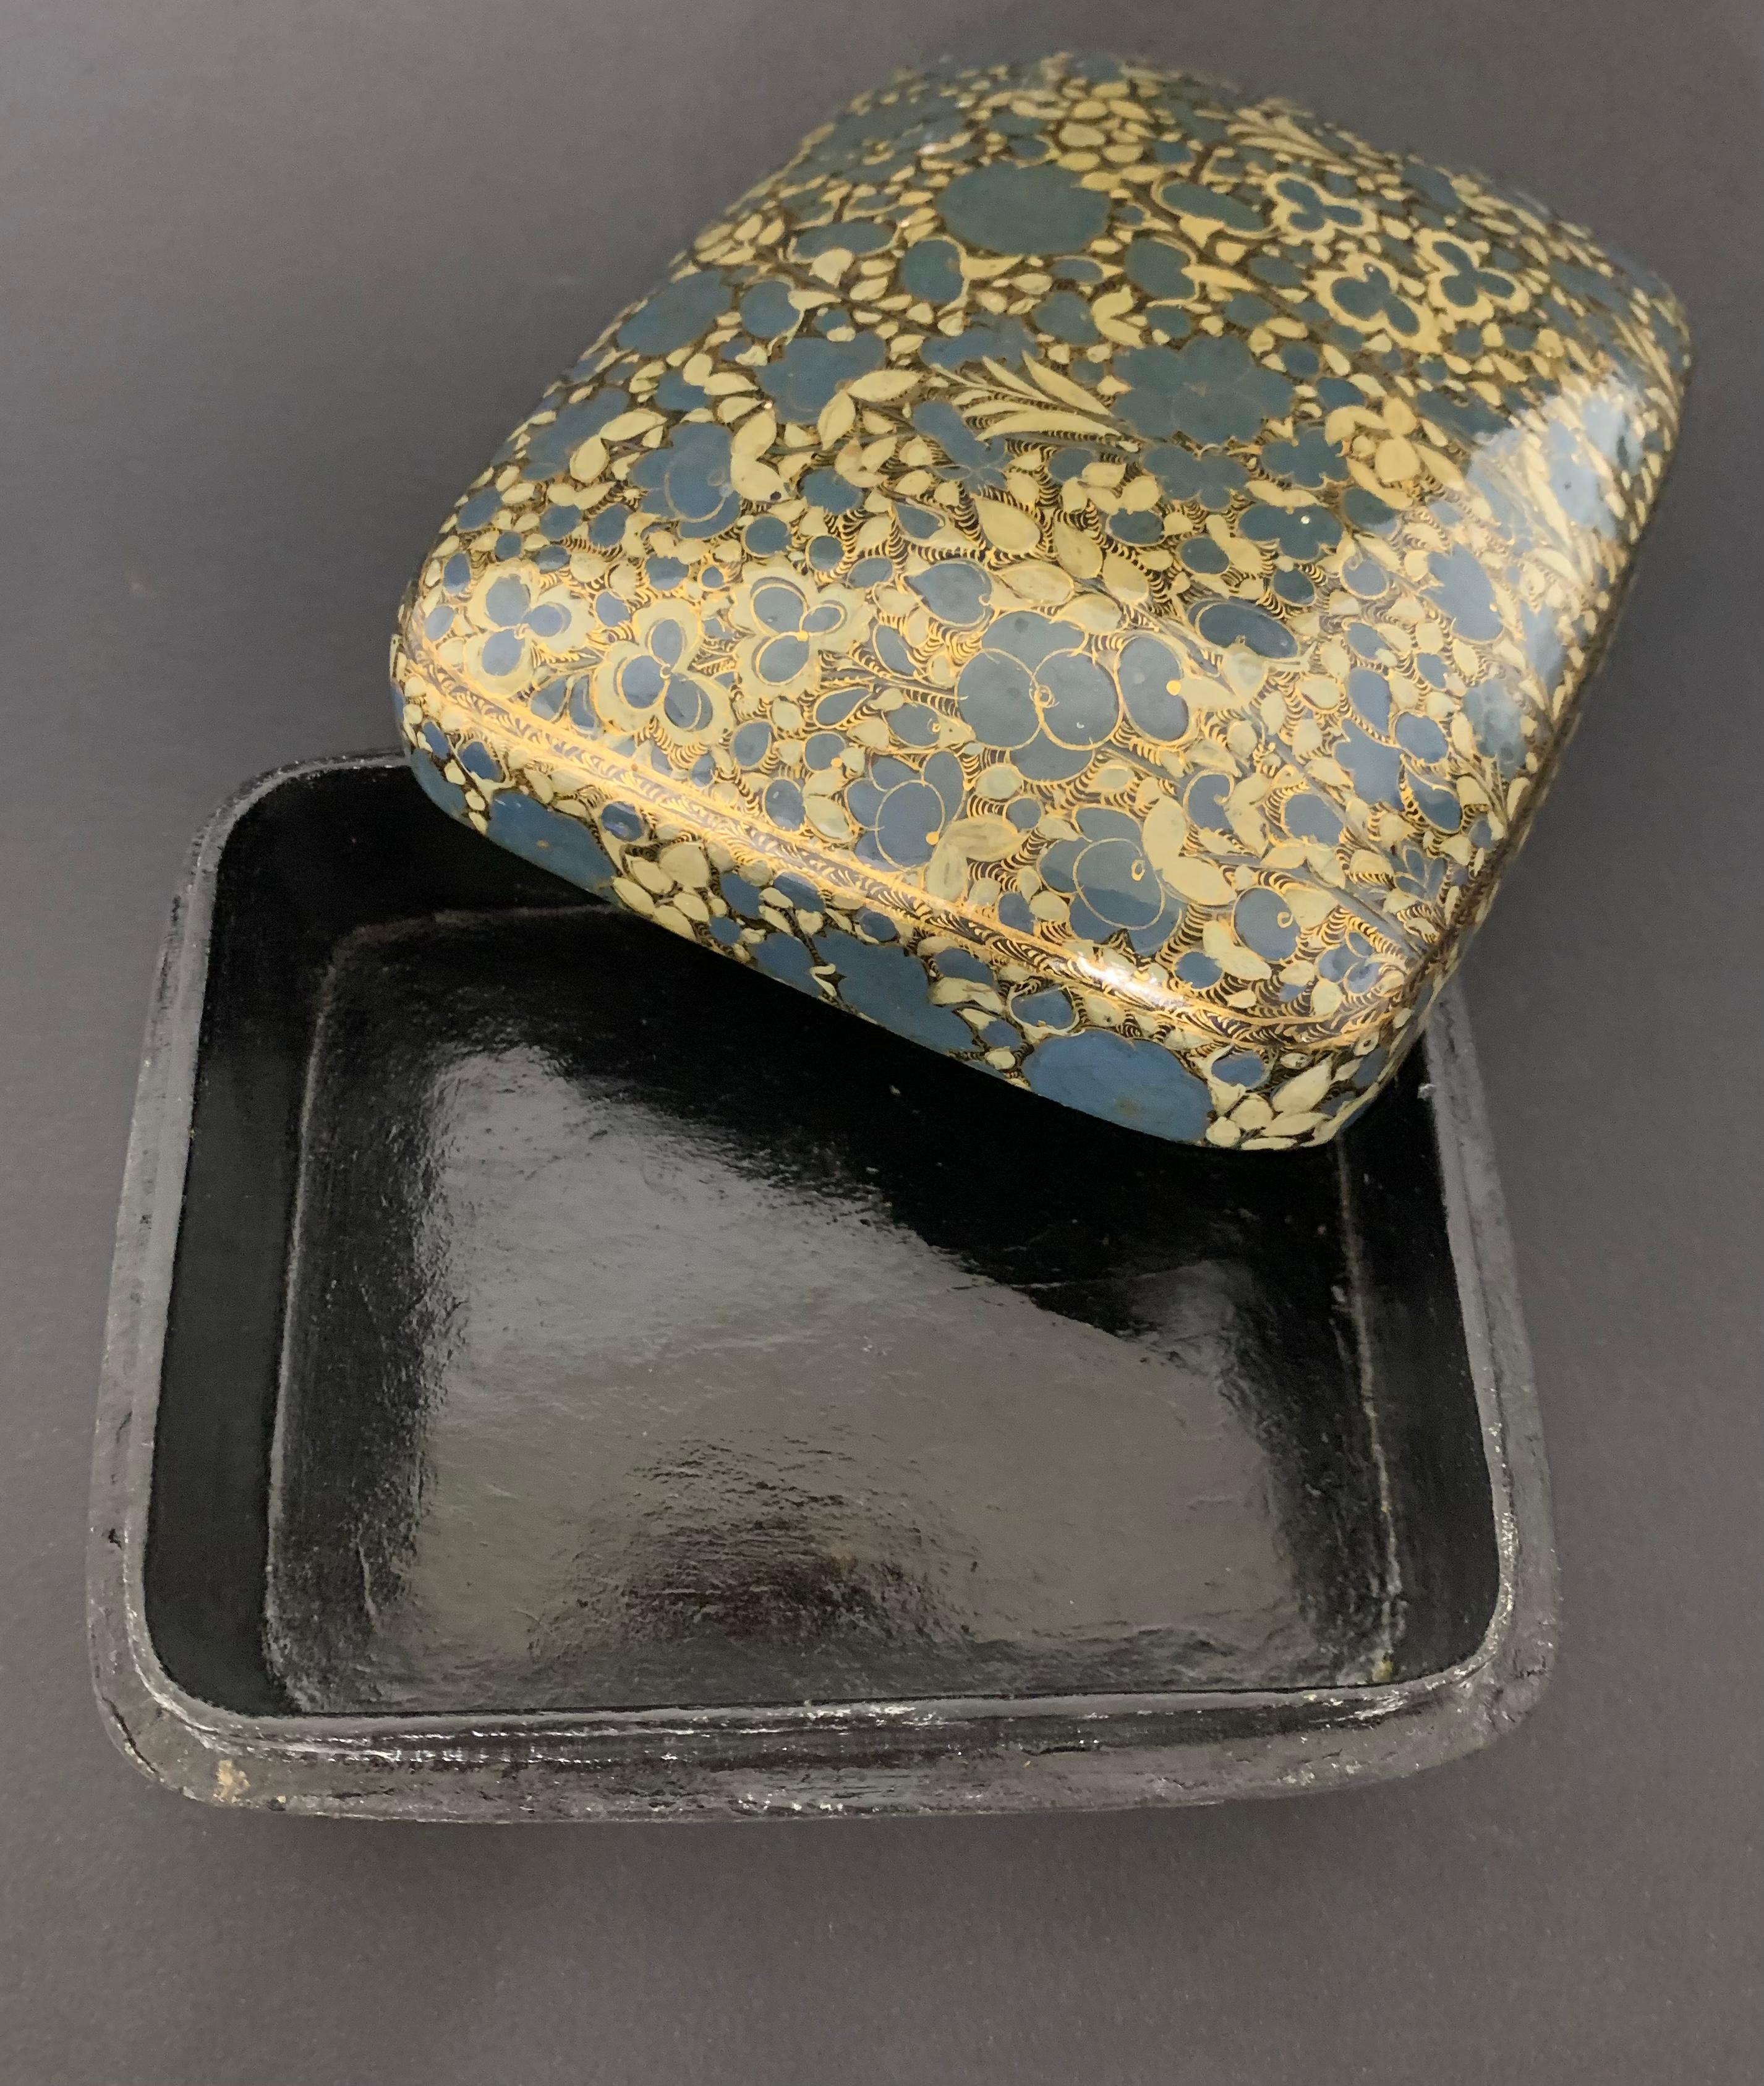 Paper Japanese Lacquer Box with Blue Flowers, circa 1900